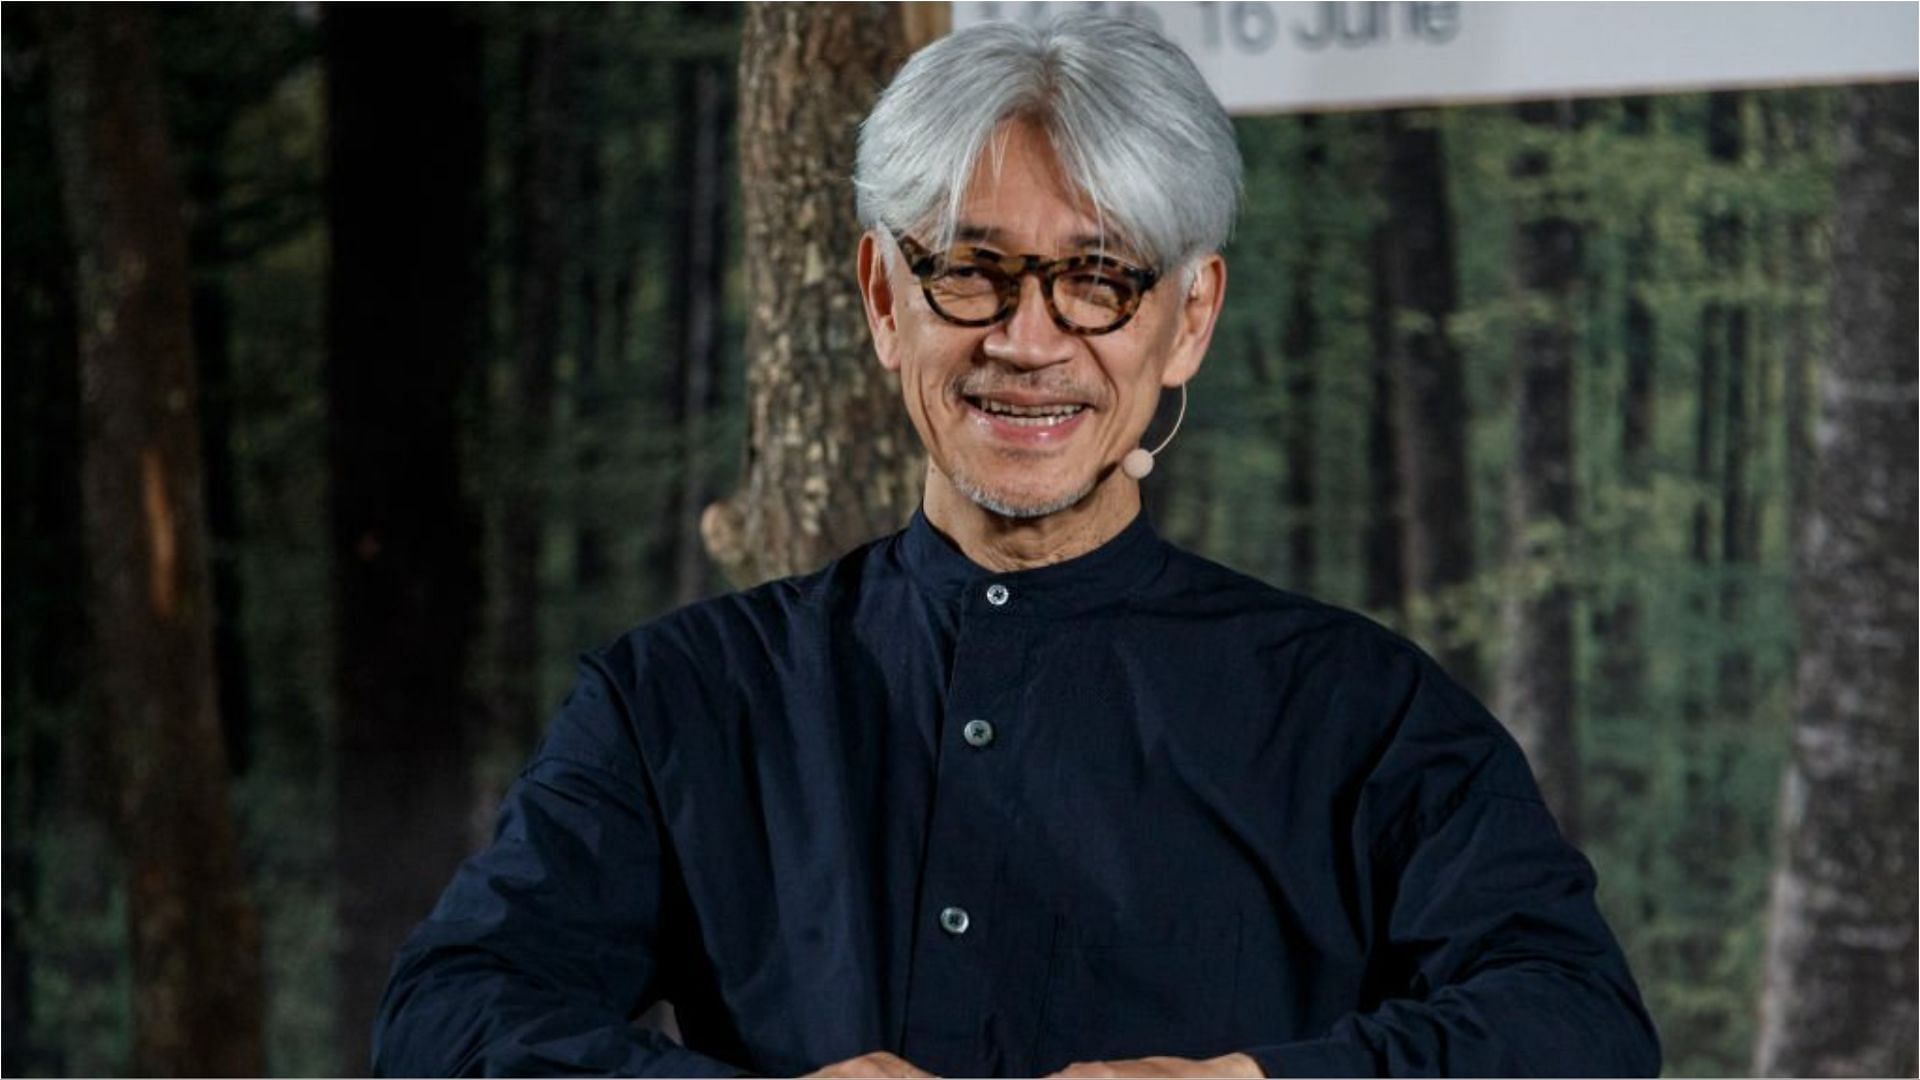 Ryuichi Sakamoto recentlty died at the age of 71 (Image via Xavi Torrent/Getty Images)